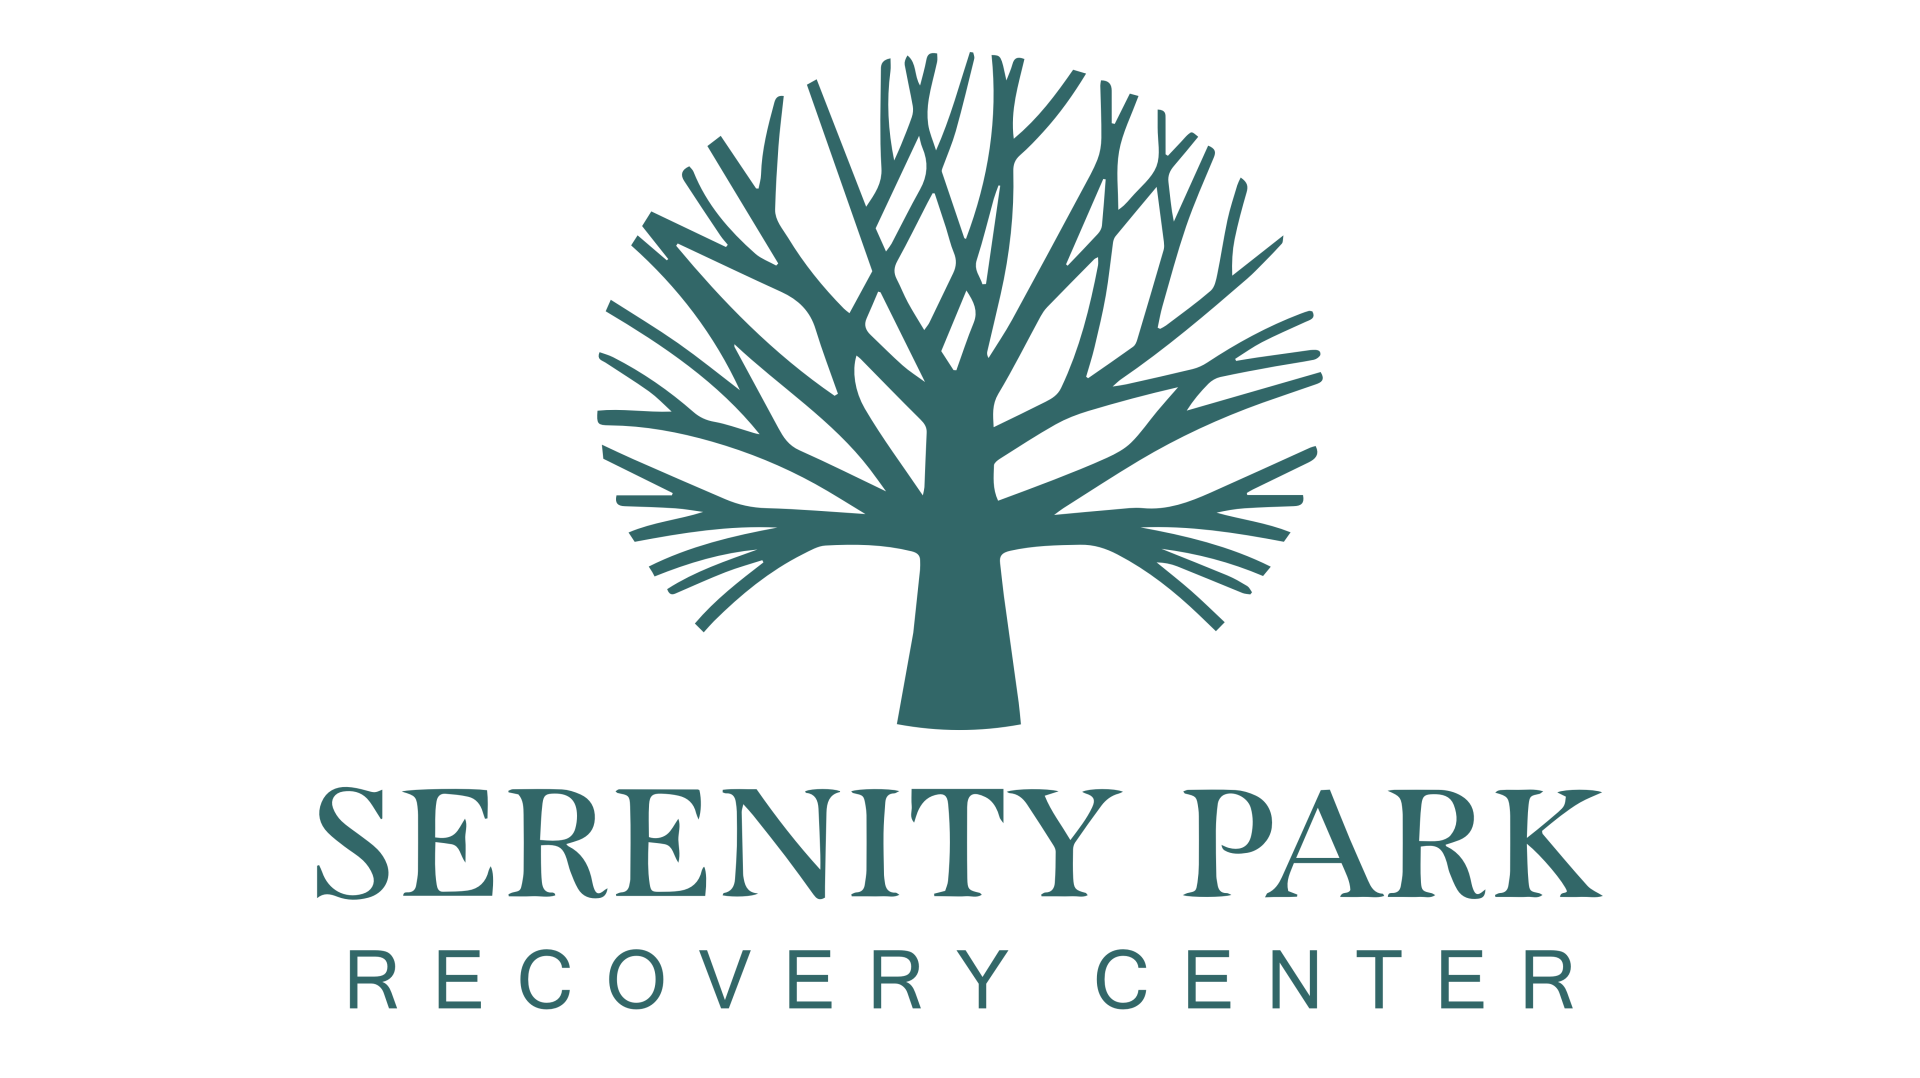 Serenity Park Recovery Center